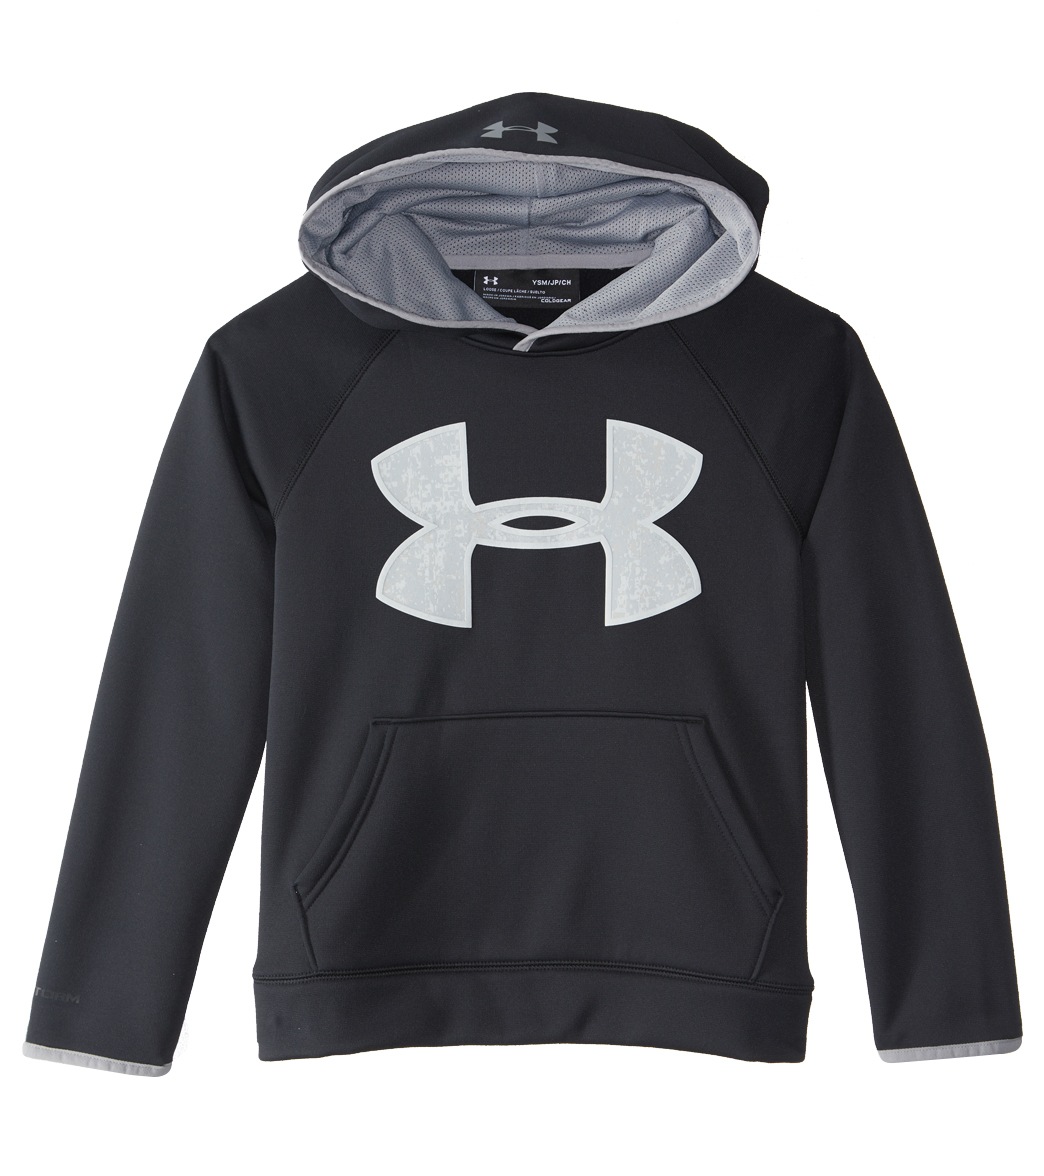 Under Armour Boys' Af Big Logo Hoody - Black -Steel-Overcast Gray X-Small /Steel/Overcast Gray Cotton/Polyester - Swimoutlet.com